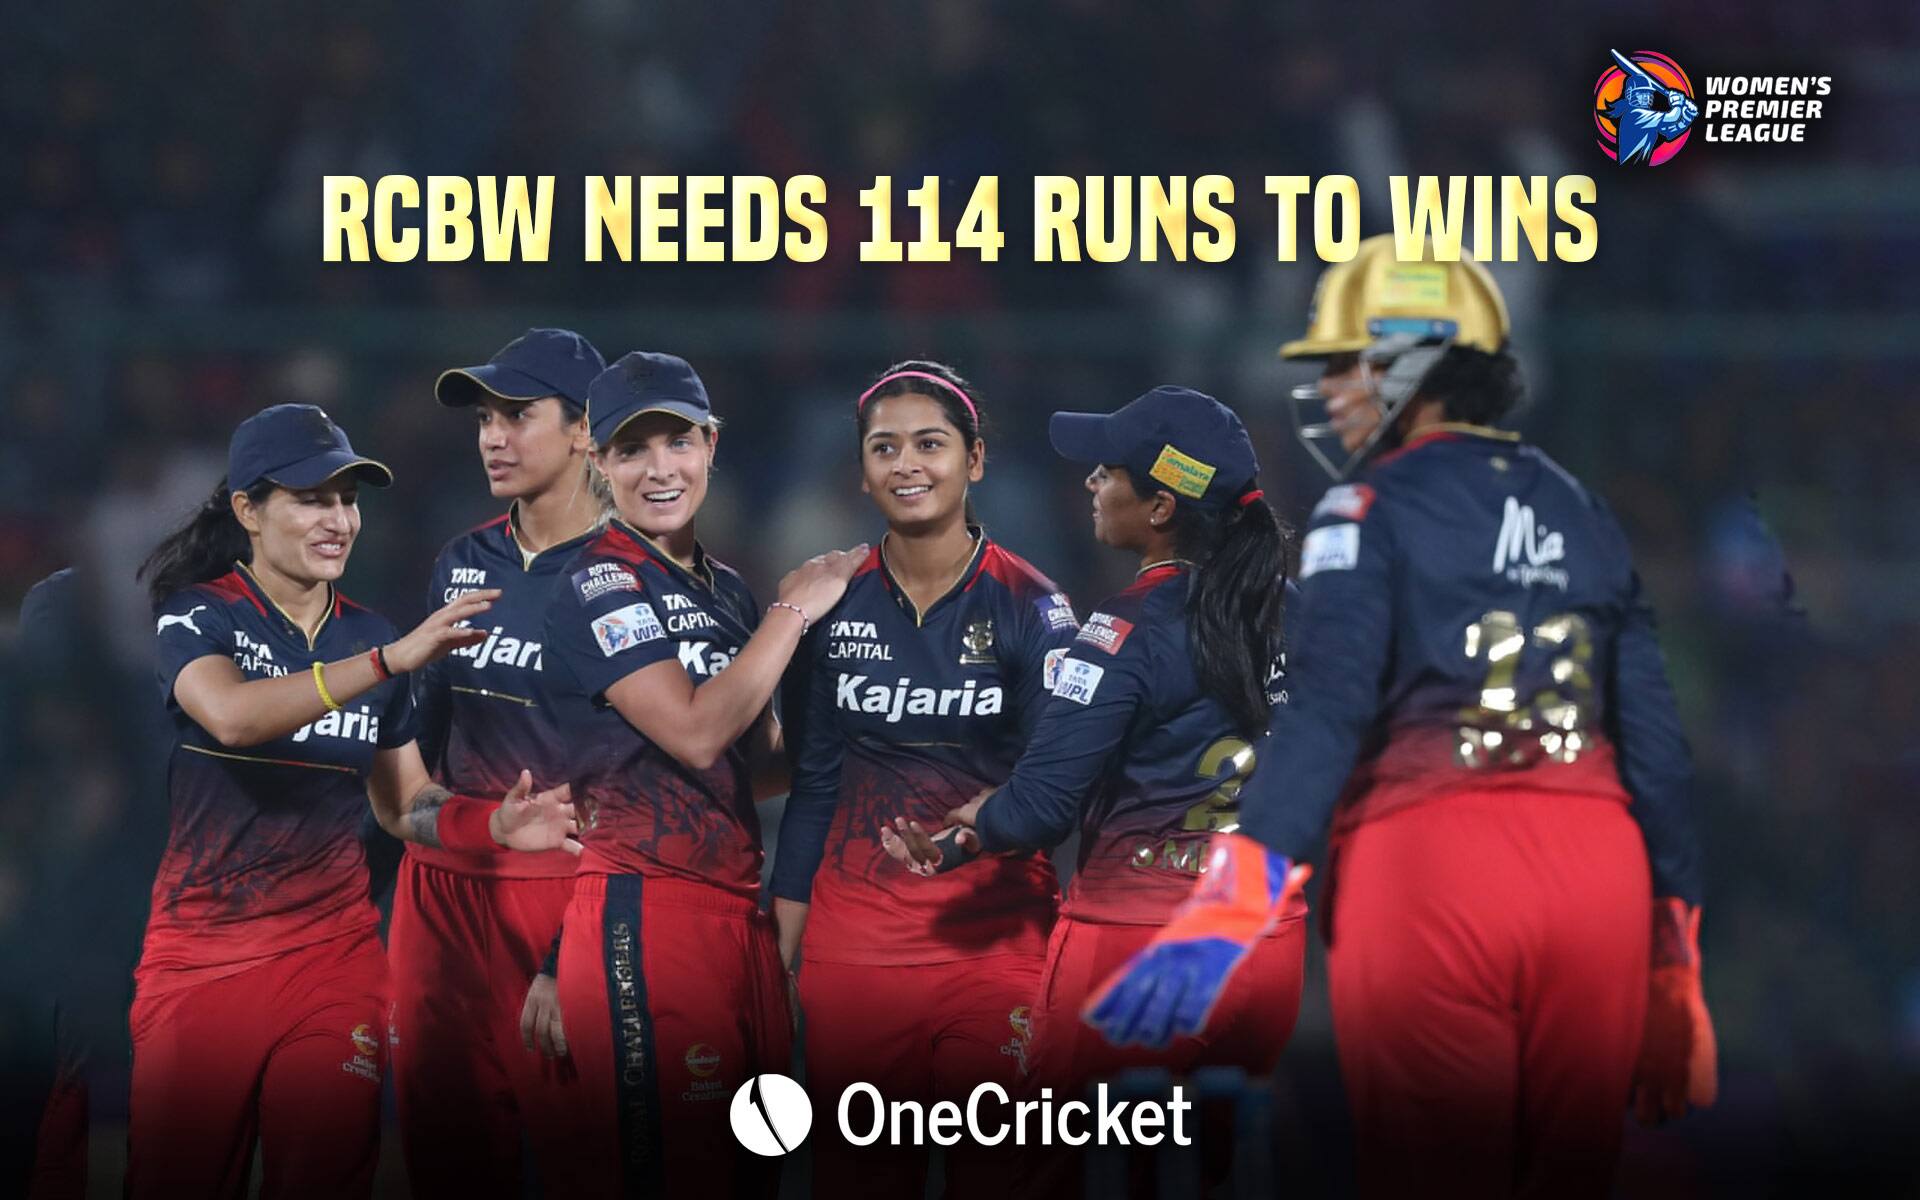 RCB need 114 to win the WPL title (Source: OneCricket)